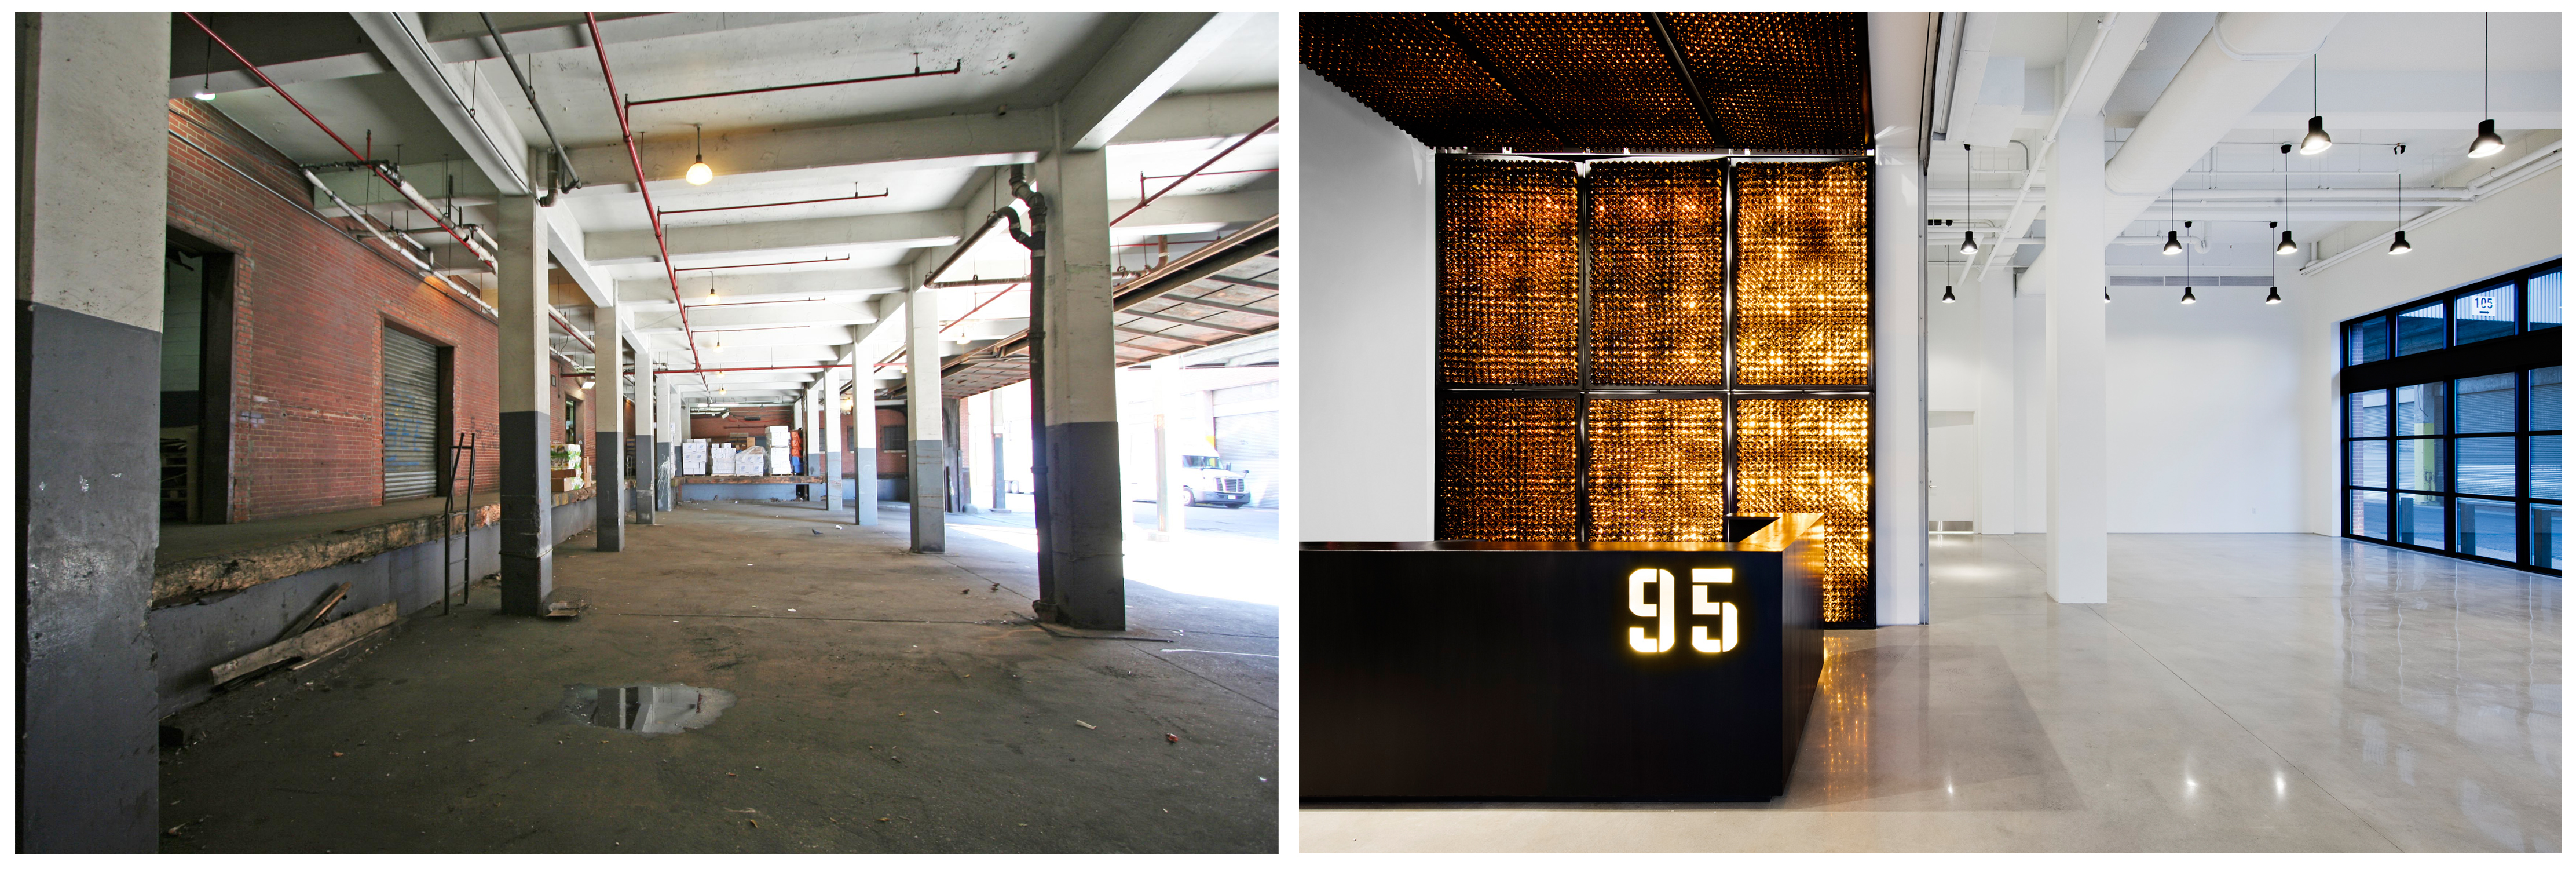 95 Evergreen Avenue, loading dock/lobby, pre-conversion and post-conversion. Photos by Connie Zhou